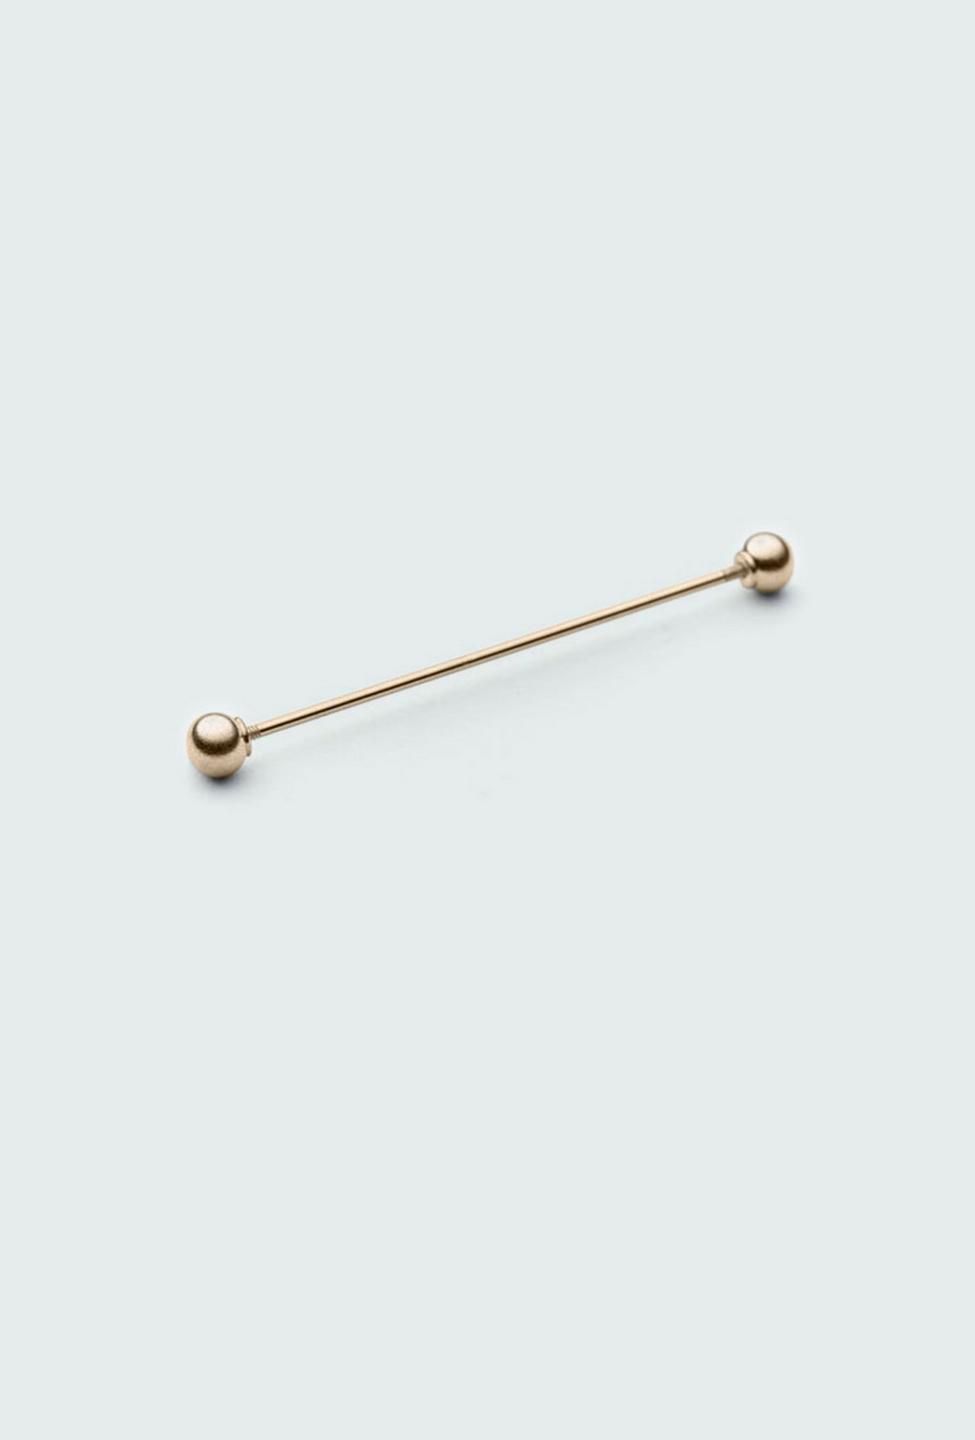 Gold tie clip - Solid Design from Indochino Collection